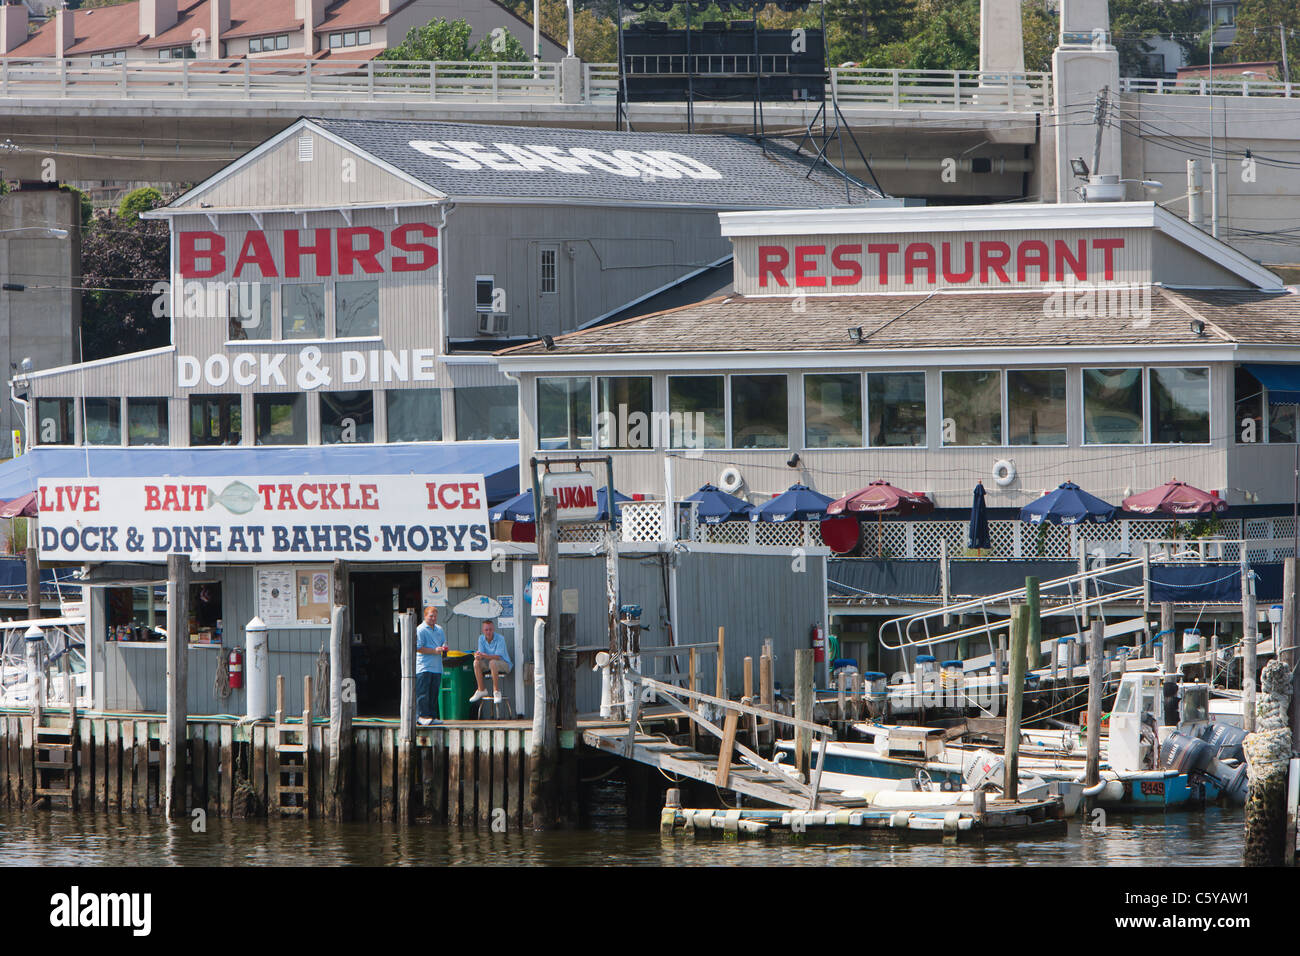 Bahr's Landing offers a restaurant, marine fuel, bait and tackle and other services and products for boaters in Highlands, New Jersey. Stock Photo